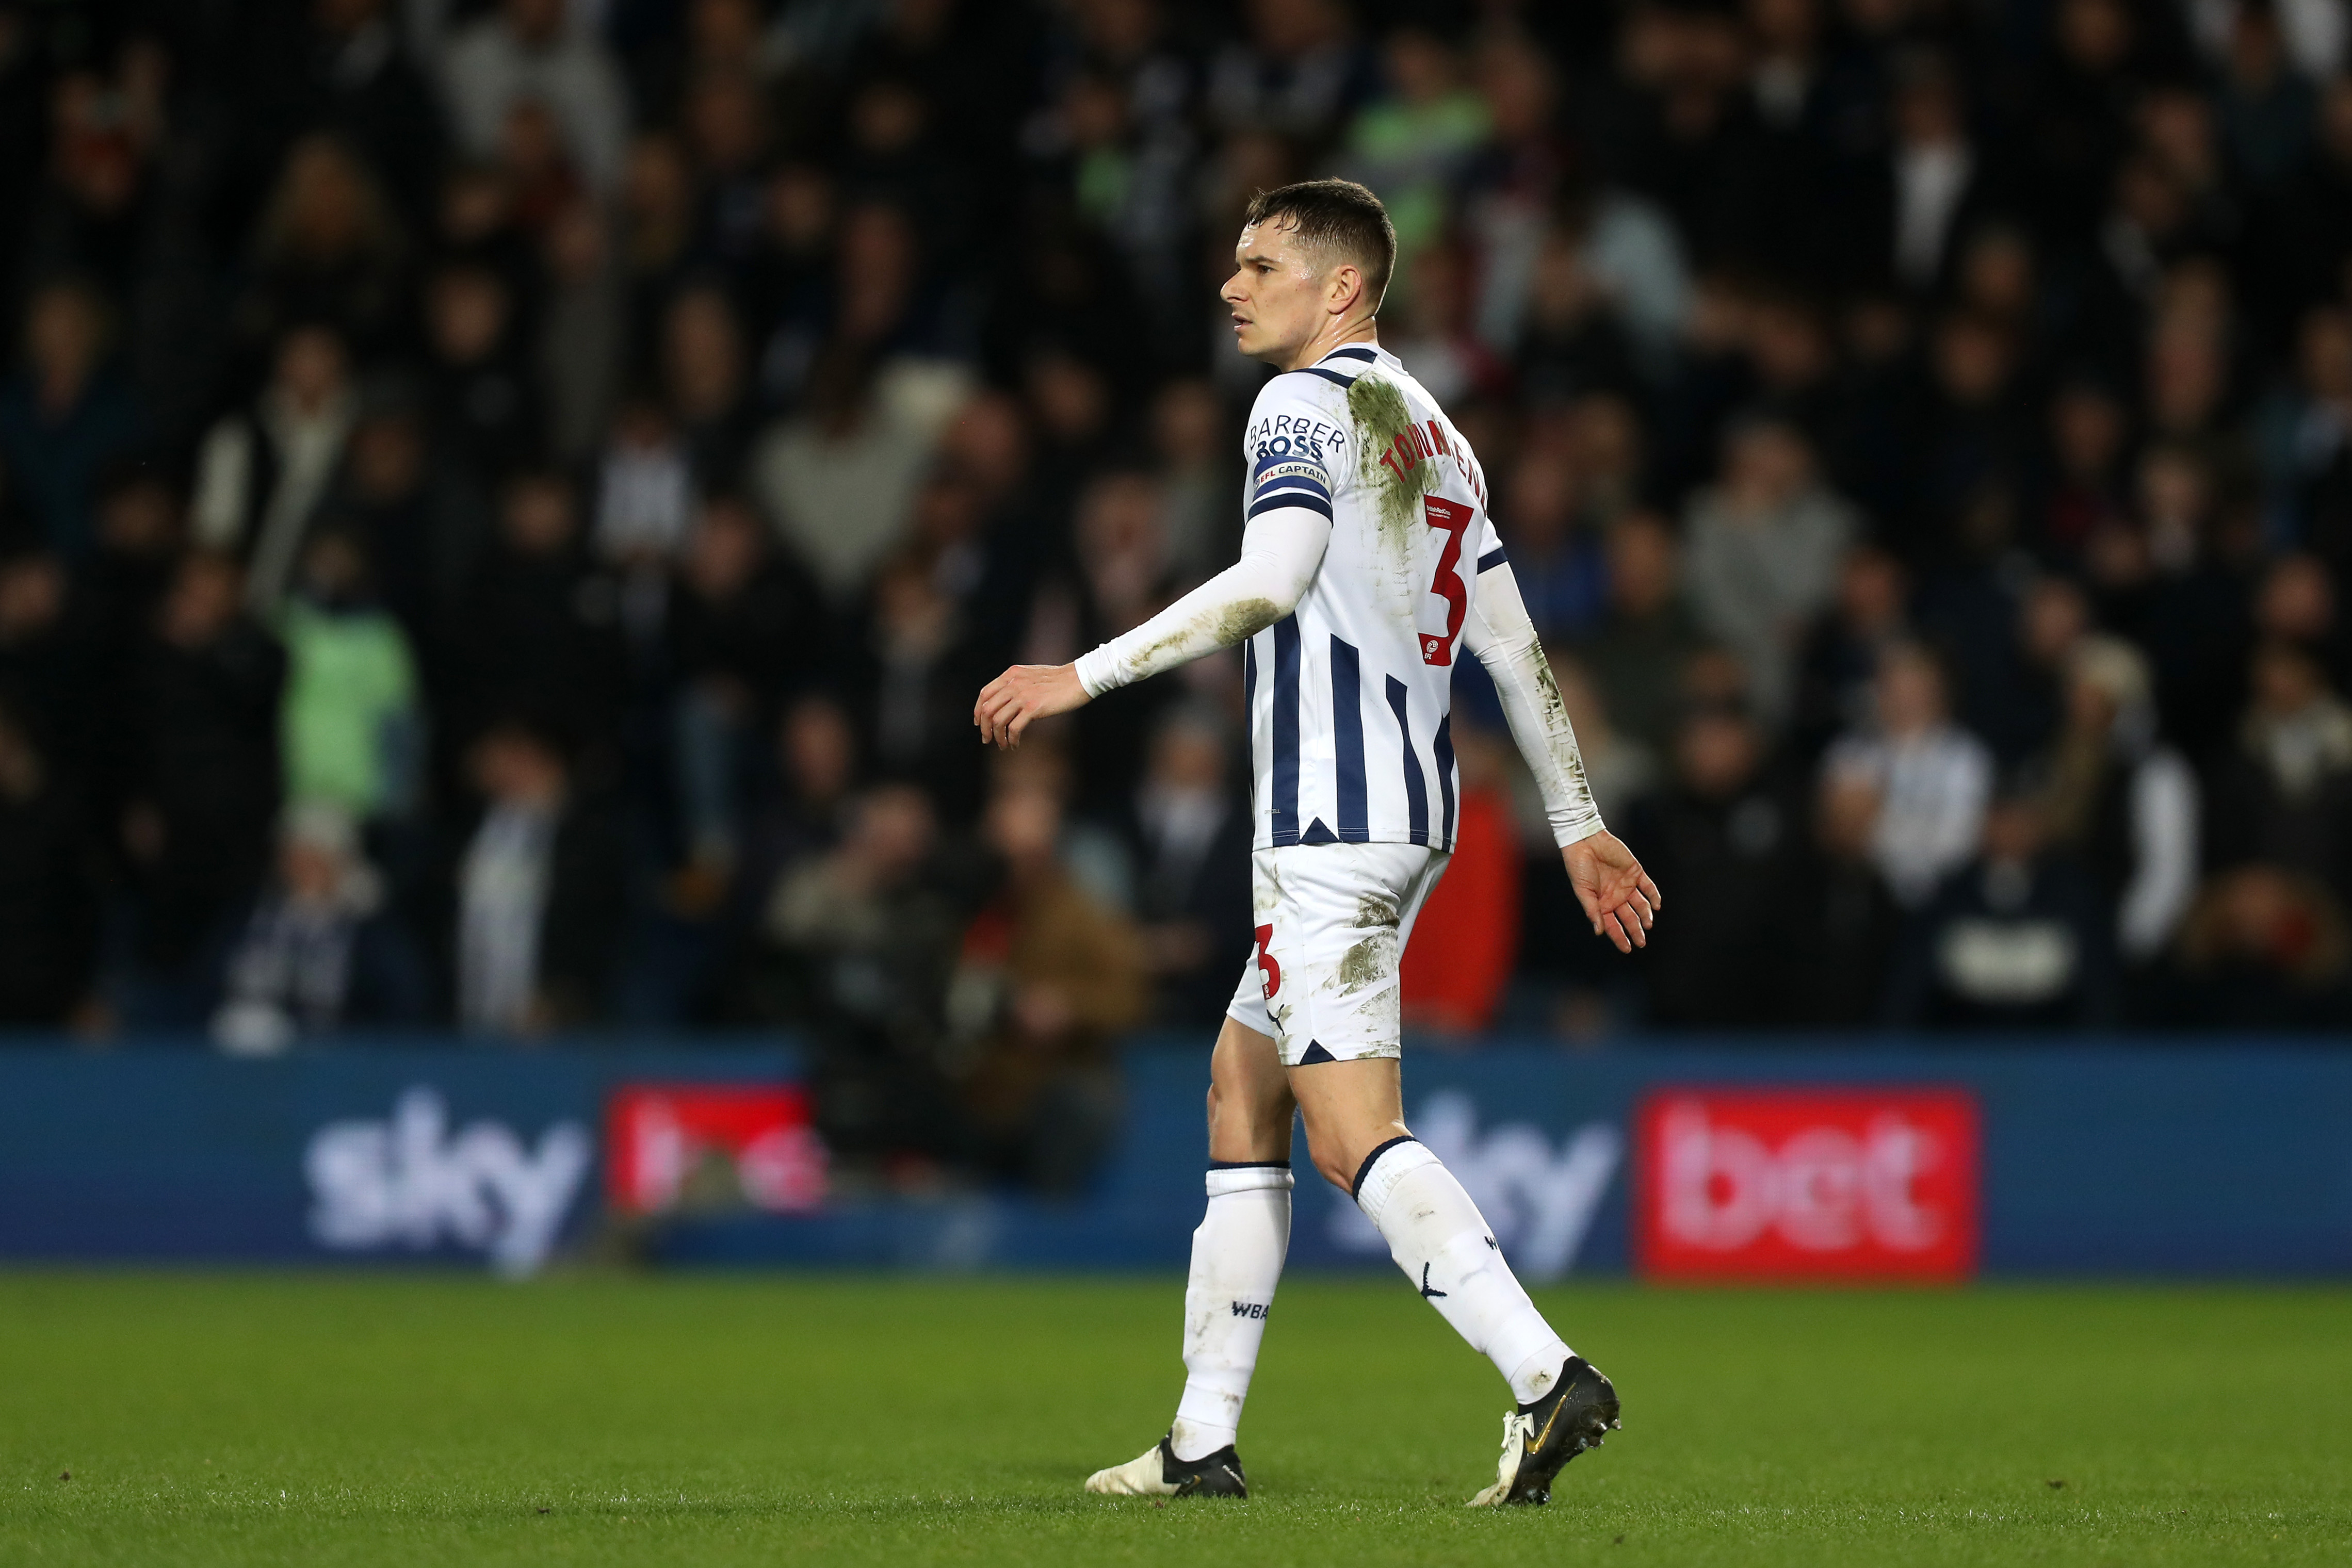 Conor Townsend in action during an Albion home game at The Hawthorns 